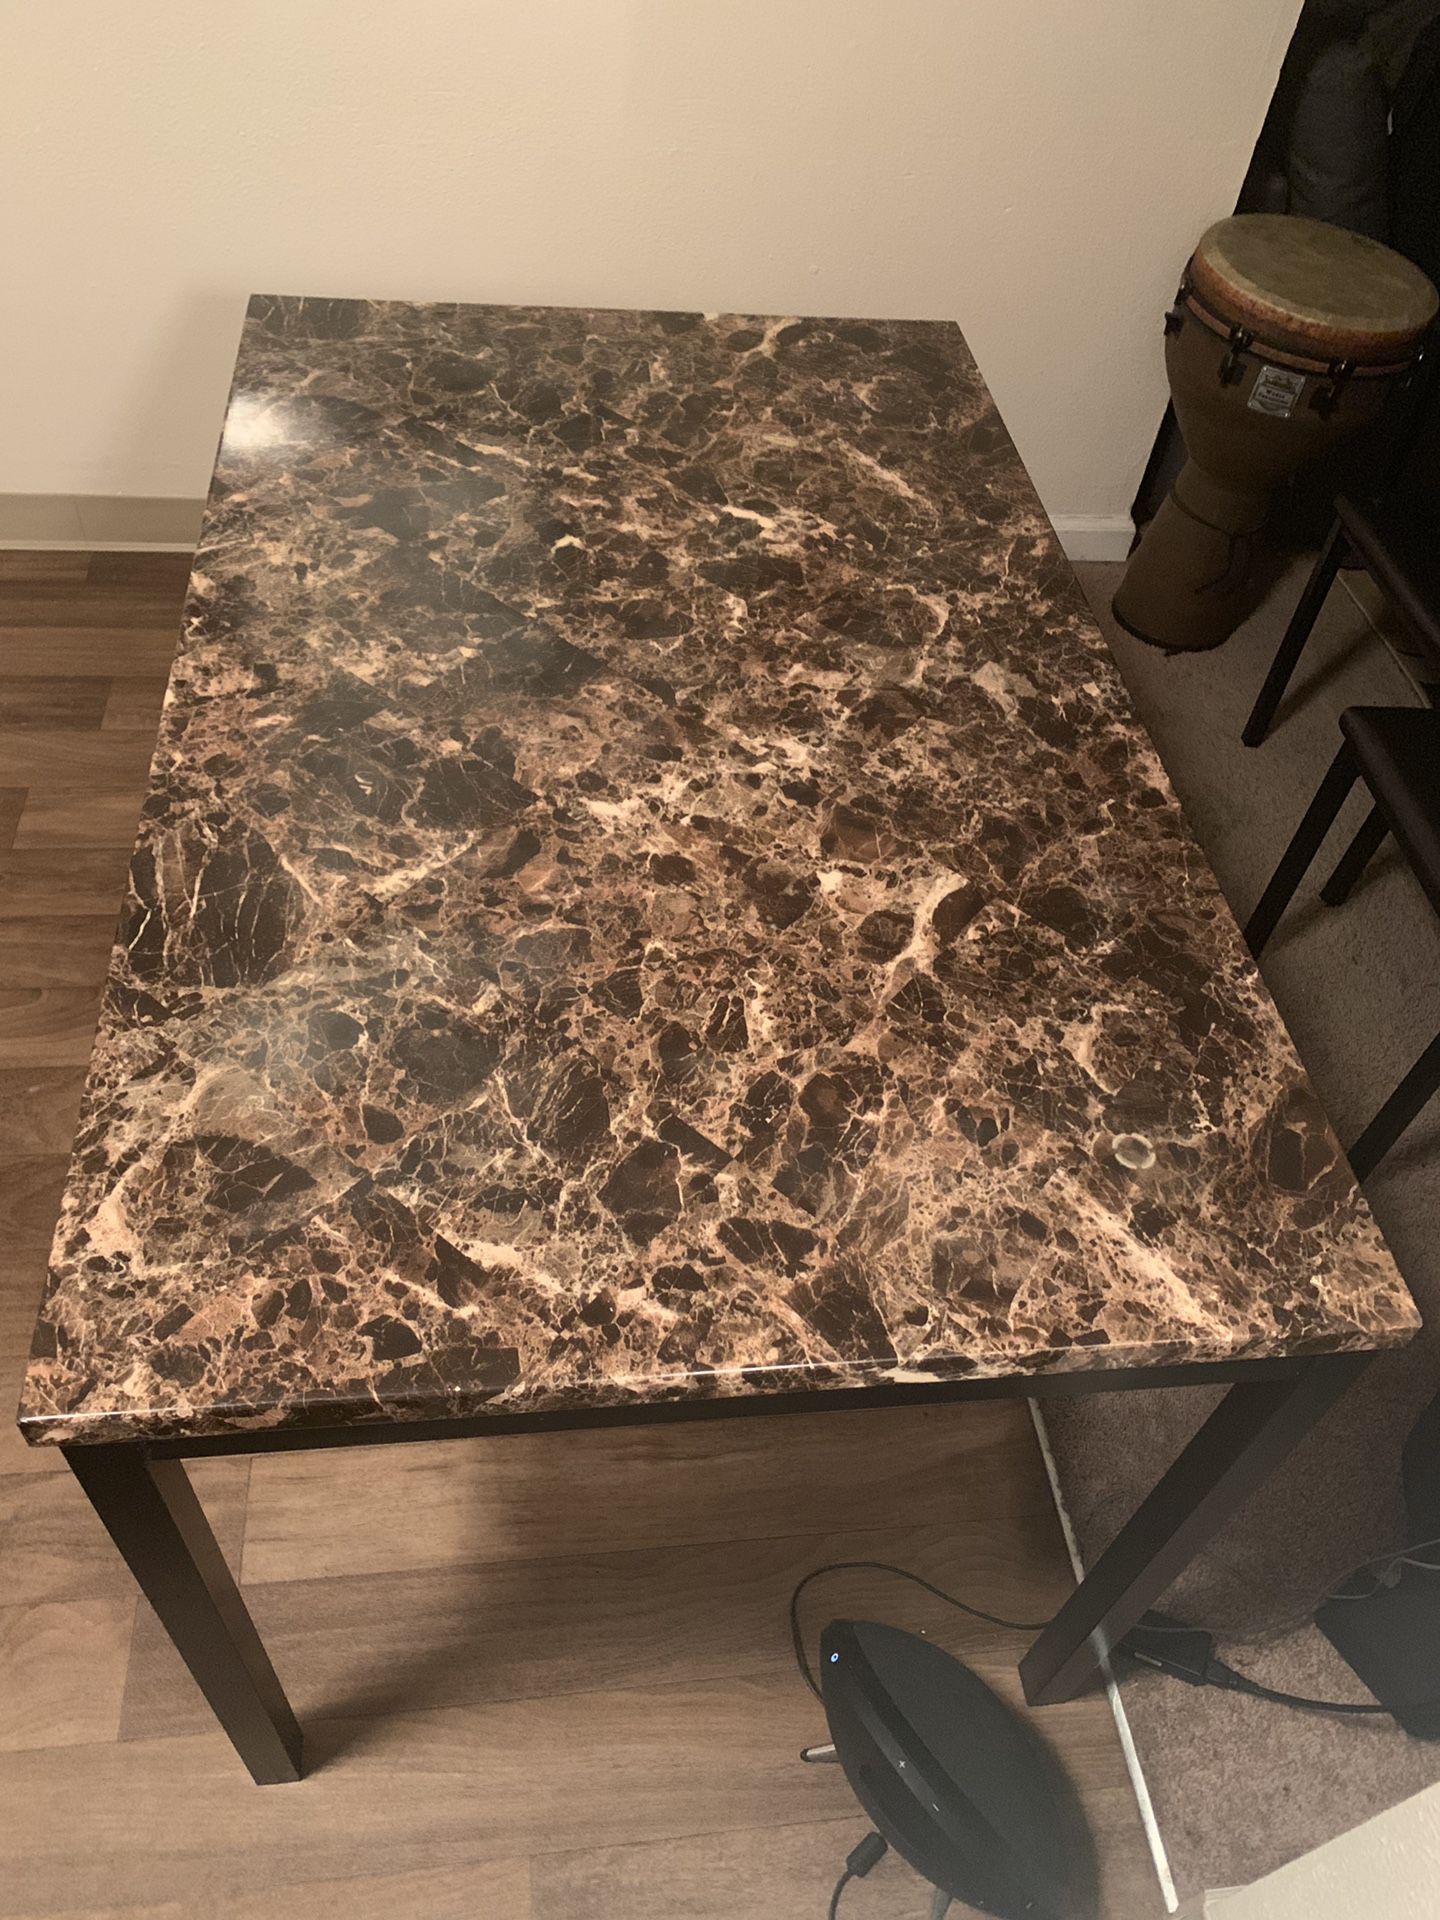 Granite Medium-Size Kitchen Dining Table w/3 Leather Chairs Included!